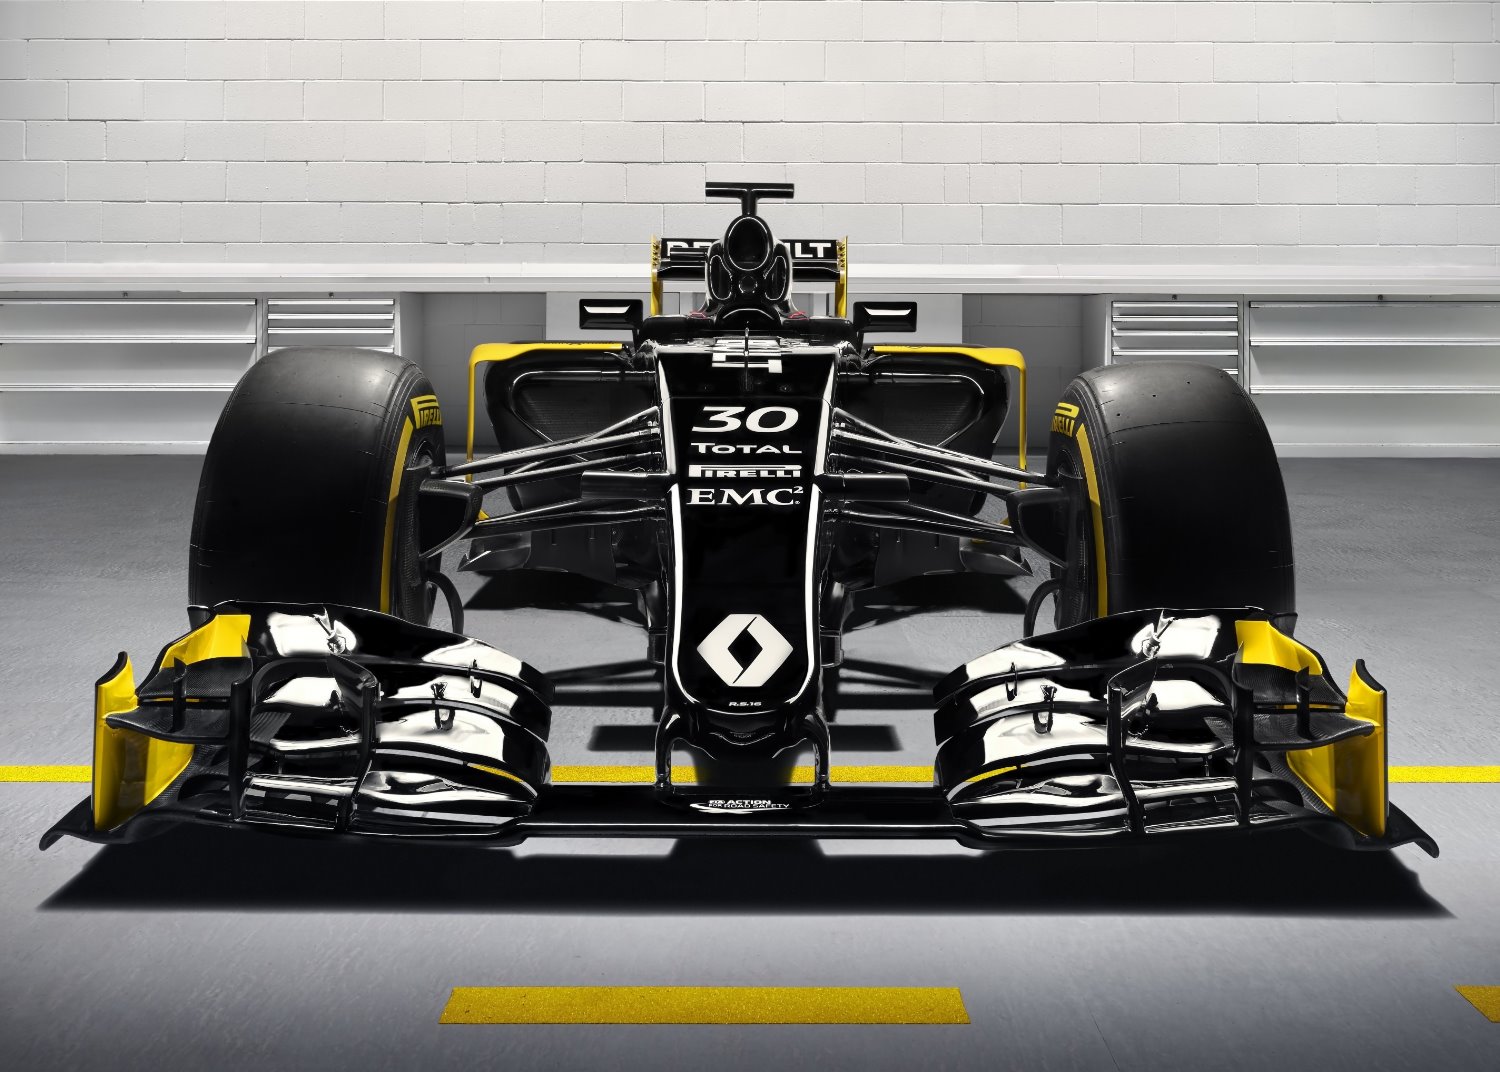 Really just Renault's test car was shown at the launch